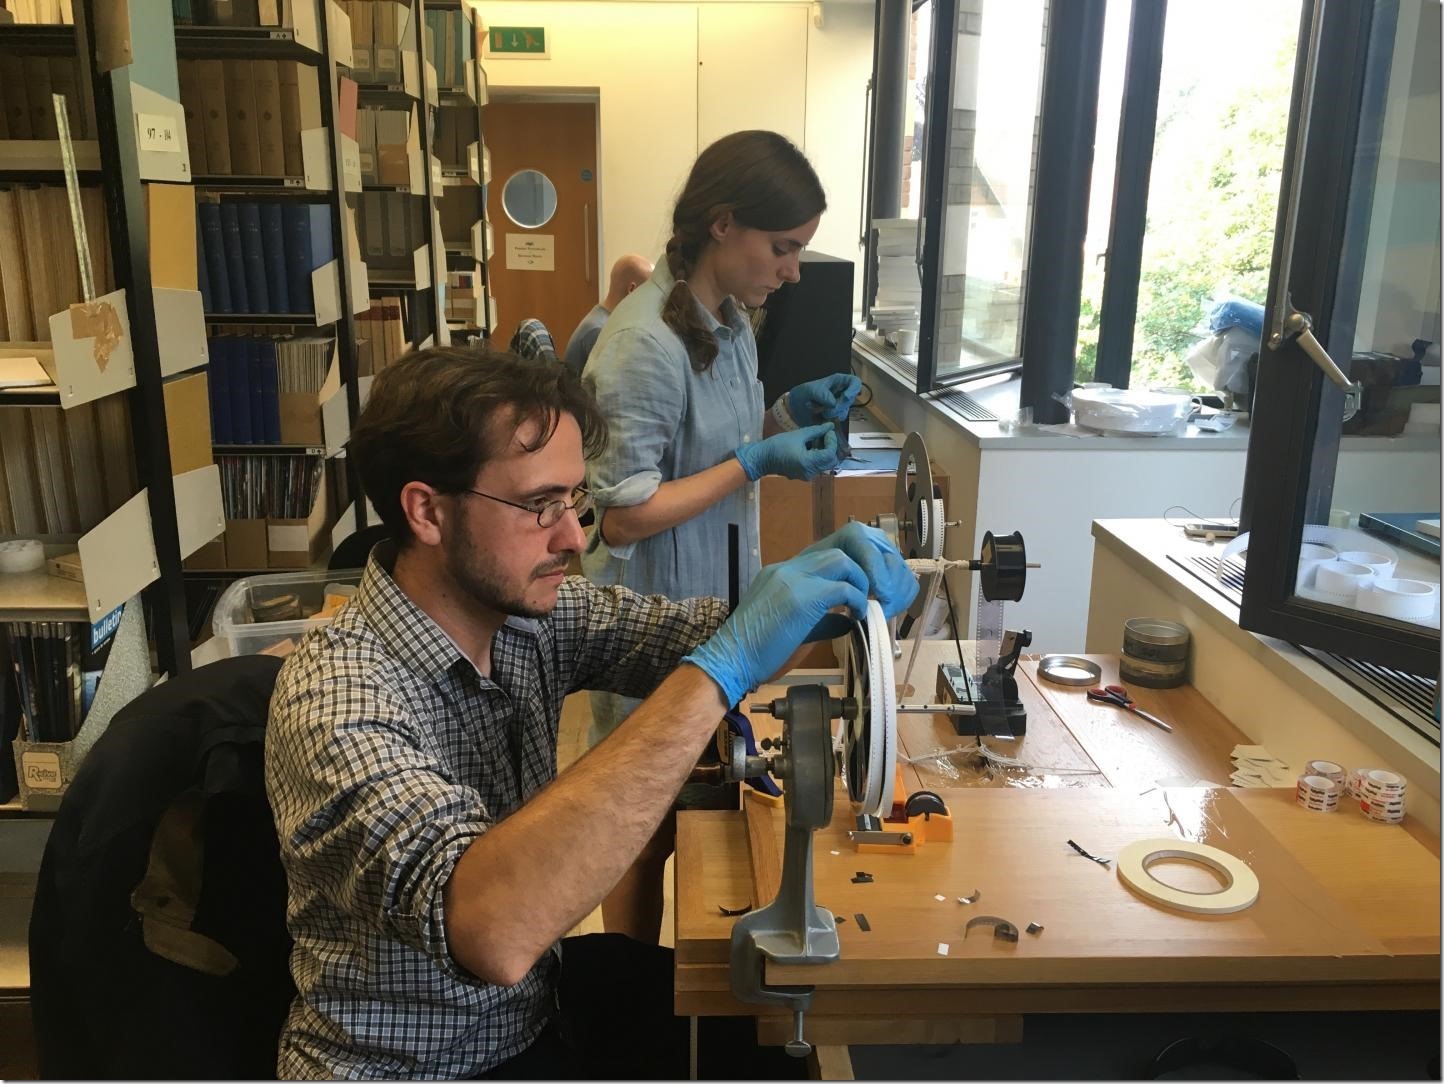 Professor Dustin Schroeder (foreground) and art historian Jessica Daniel splice 50-year-old film containing radar measurements of Antarctica into a reel in preparation for digital scanning at the Scott Polar Research Institute in the UK. Credit Courtesy of Dustin Schroeder